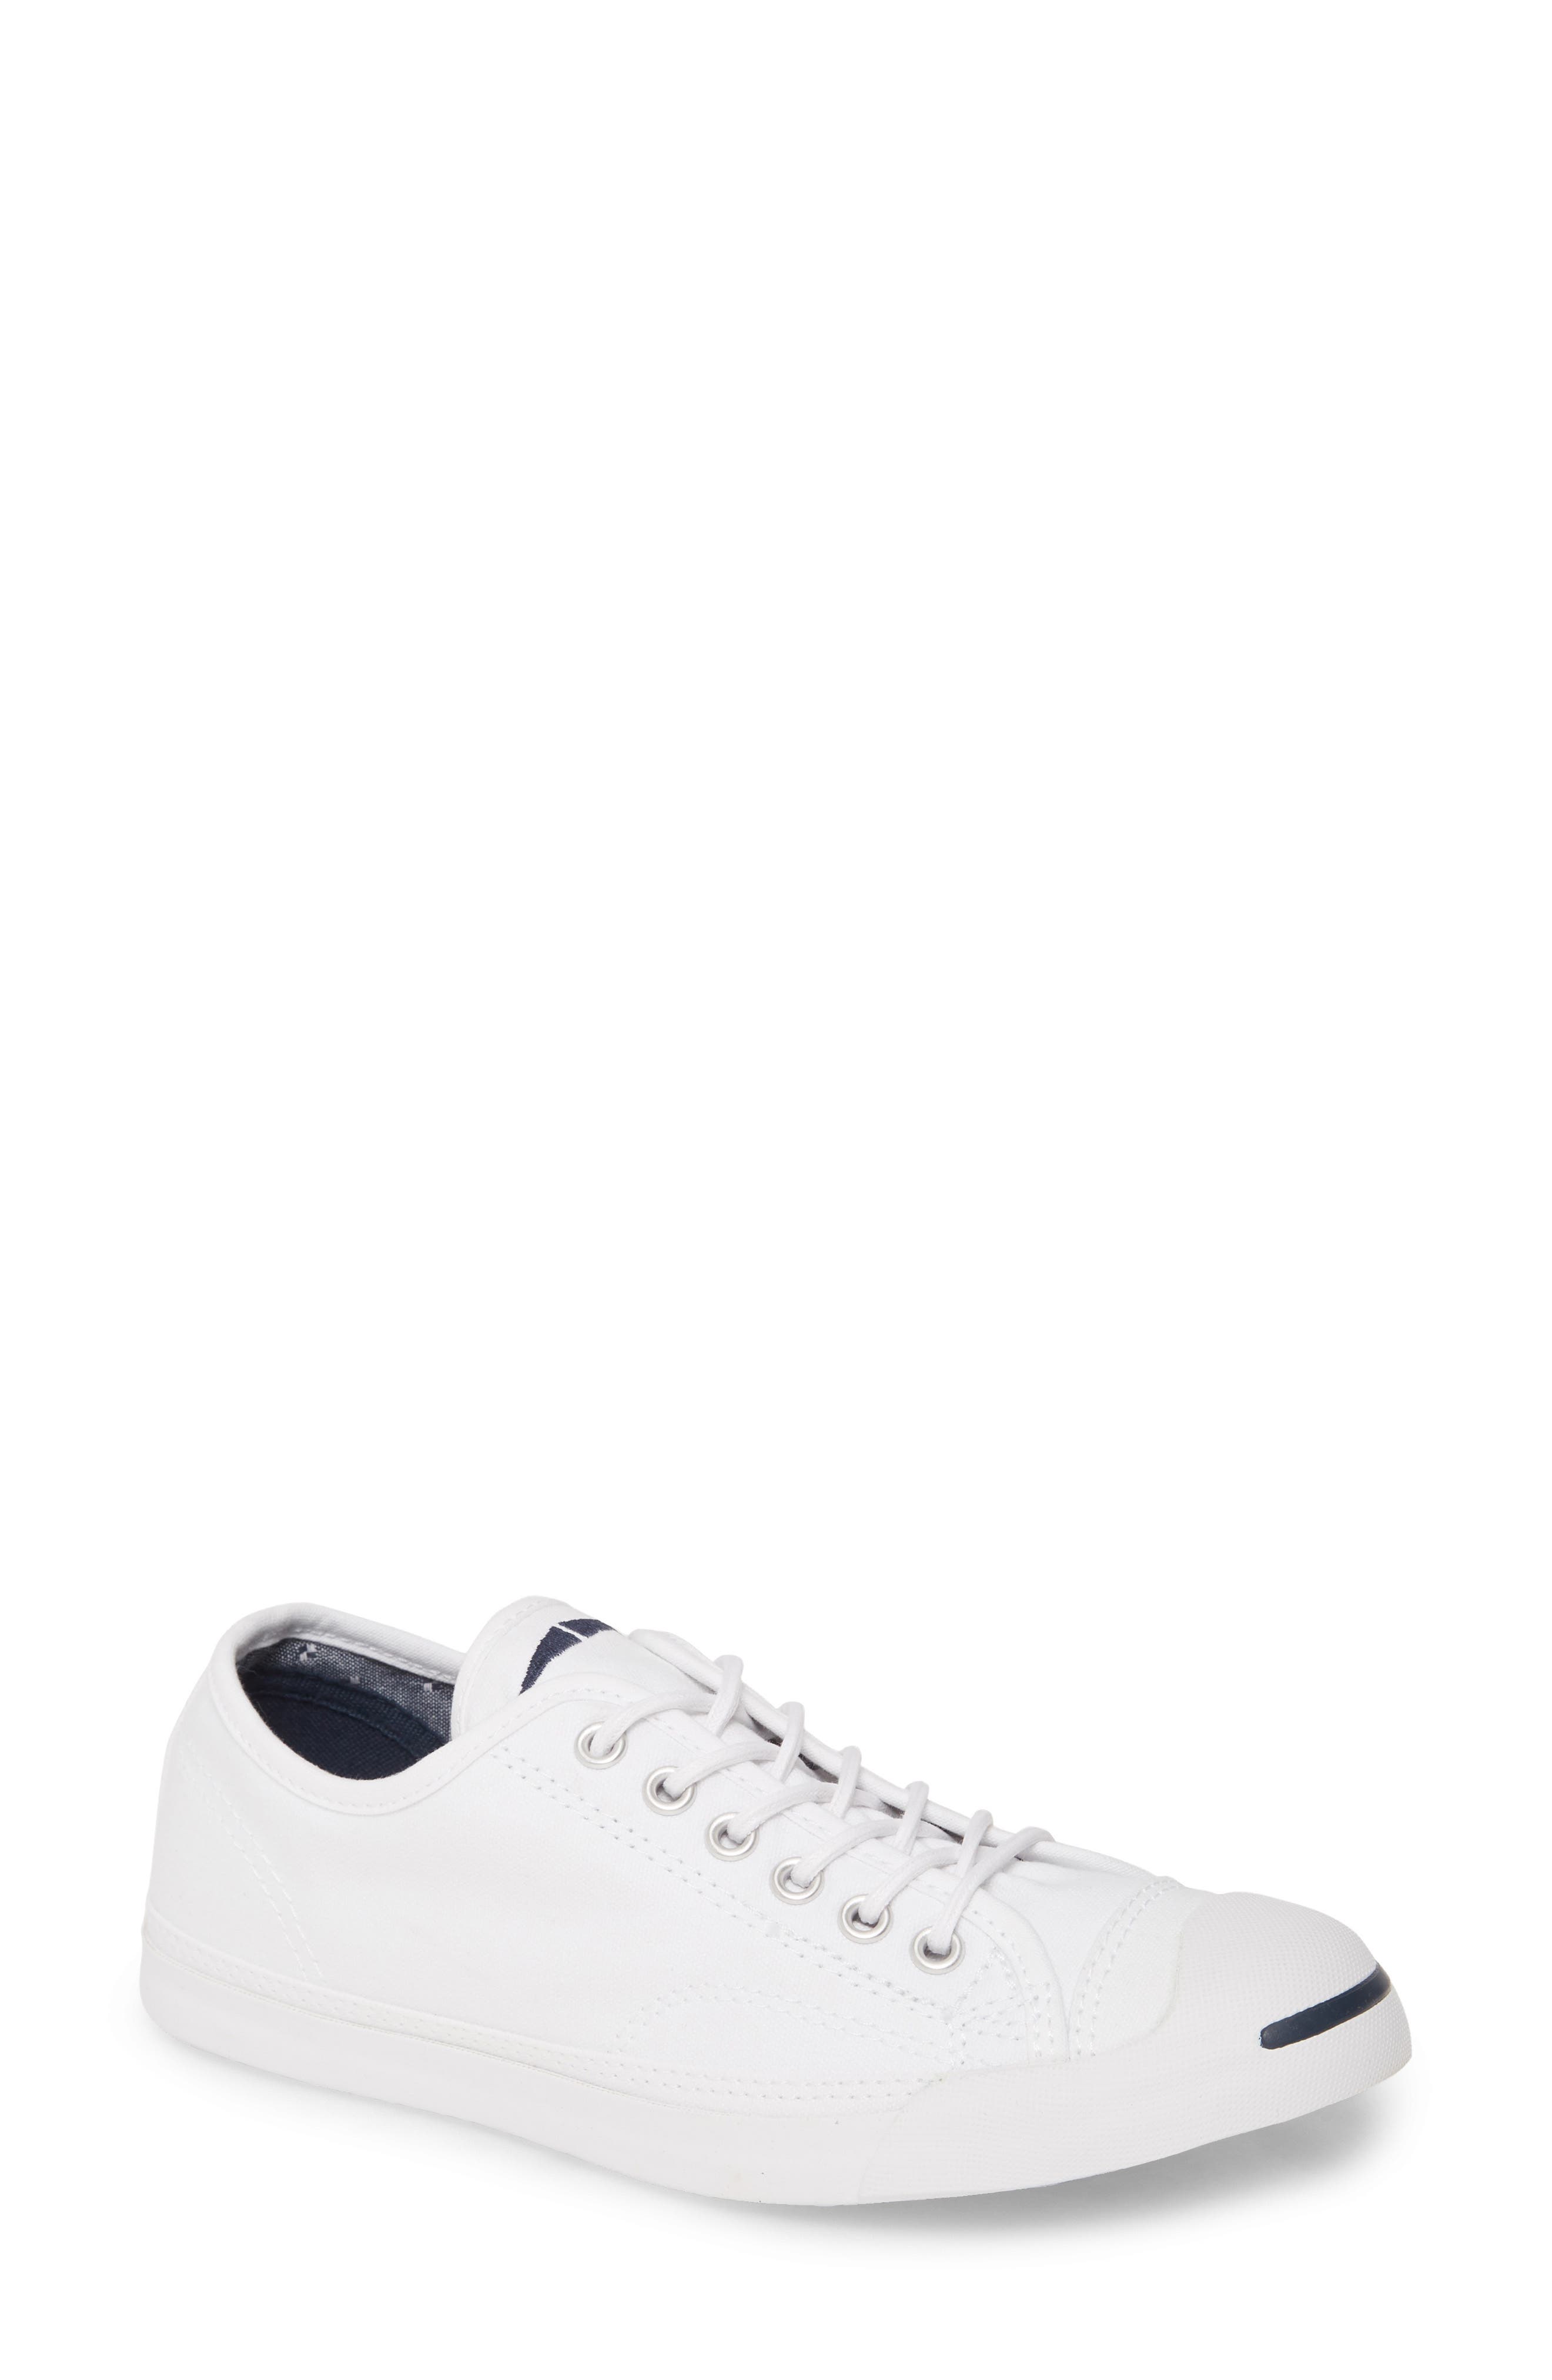 jack purcell sneaker converse